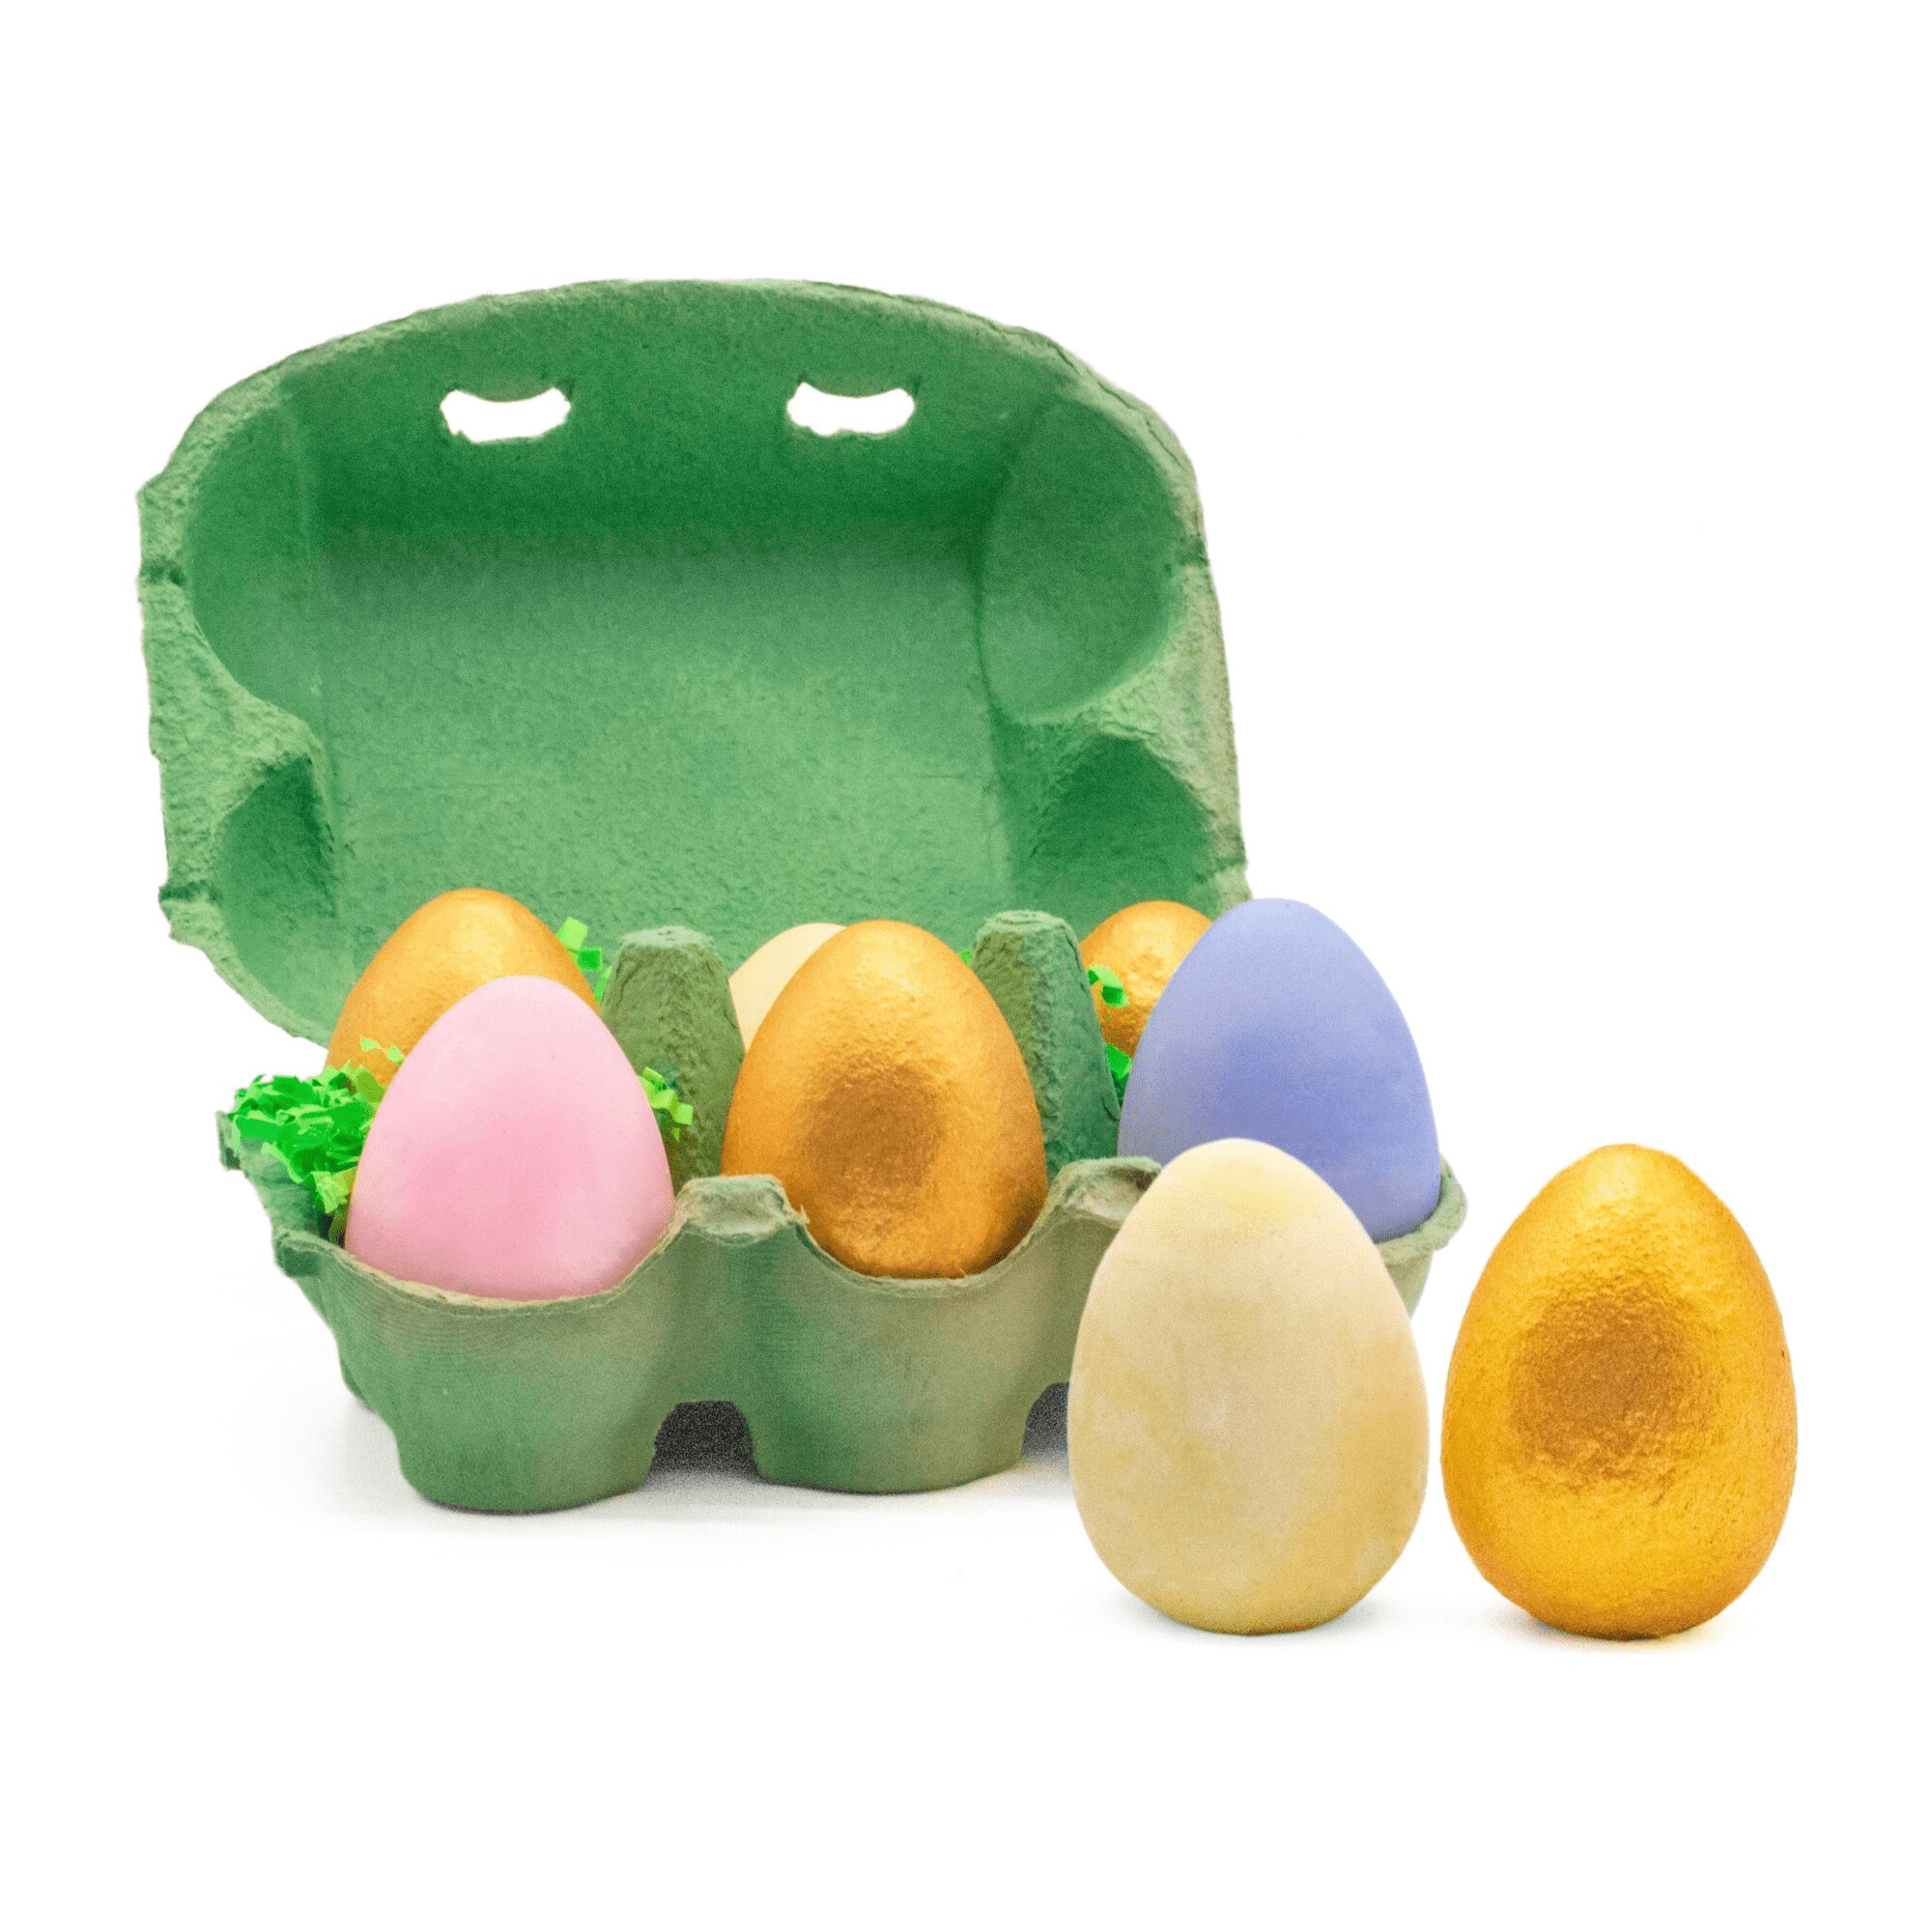 18 Pieces Easter Sidewalk Chalk Set with Easter Colorful Eggs and